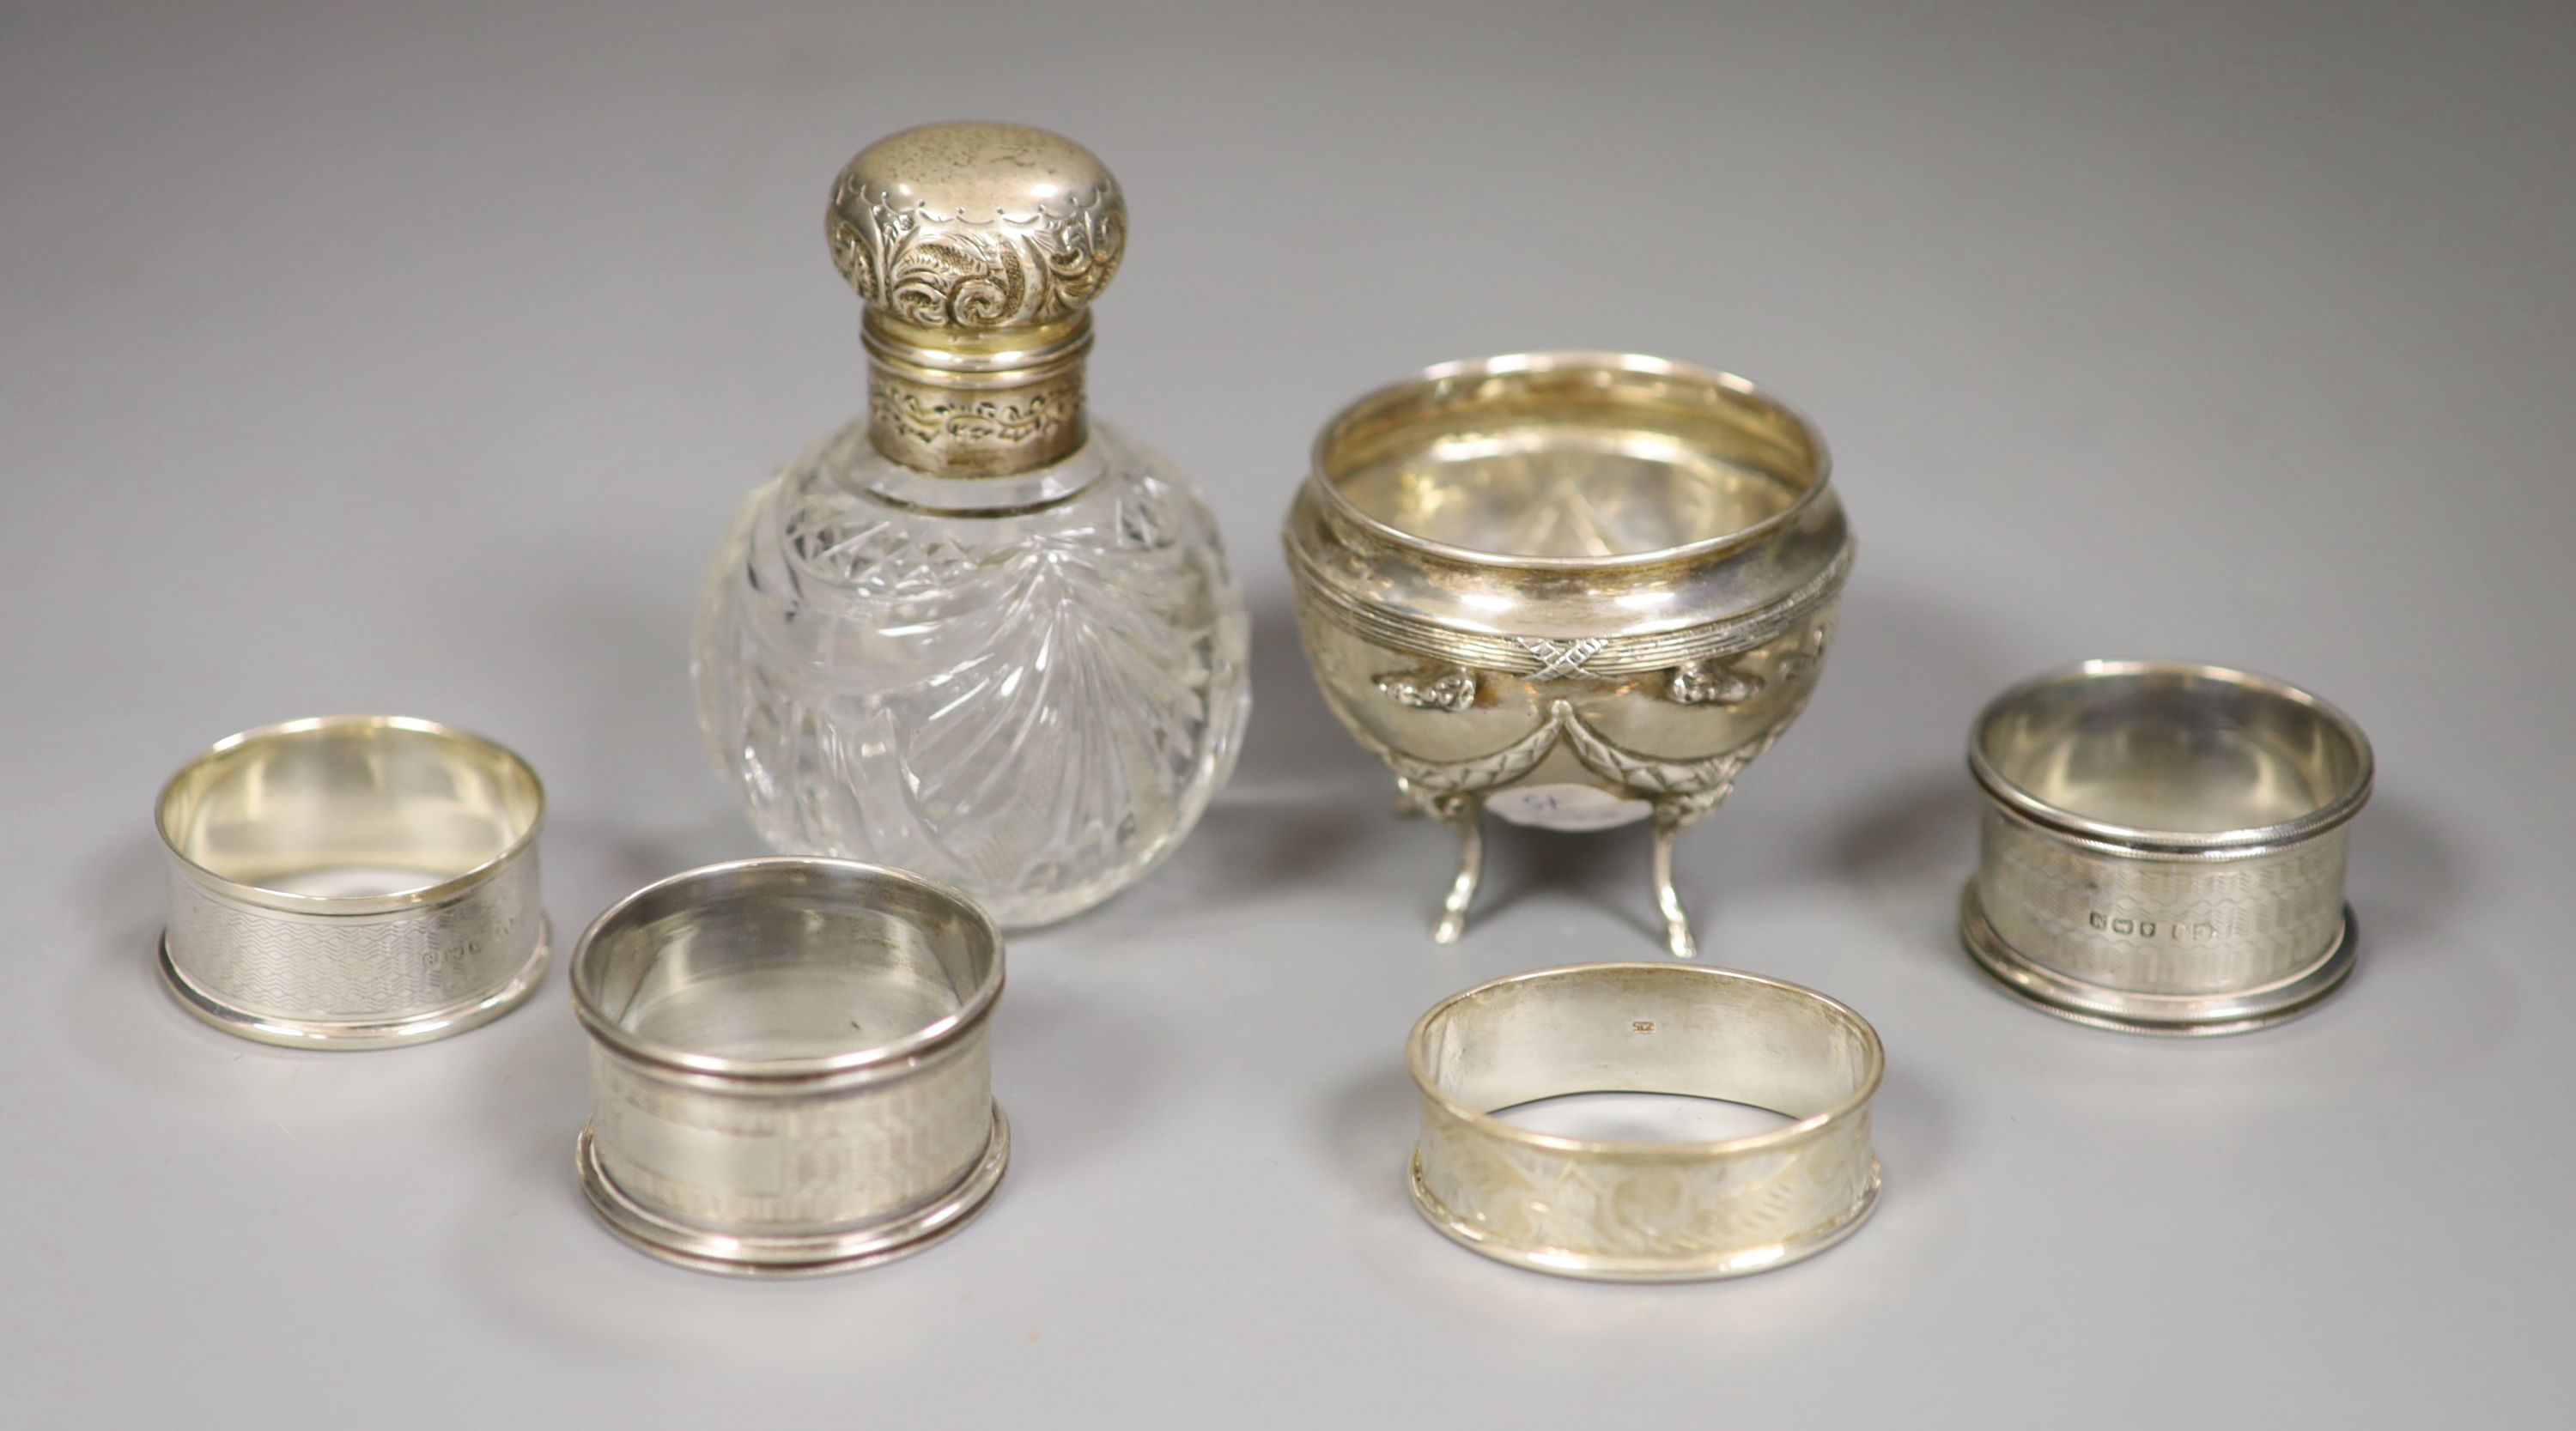 An Edwardian silver and glass globular scent bottle, a Continental cauldron shaped salt and four napkin rings